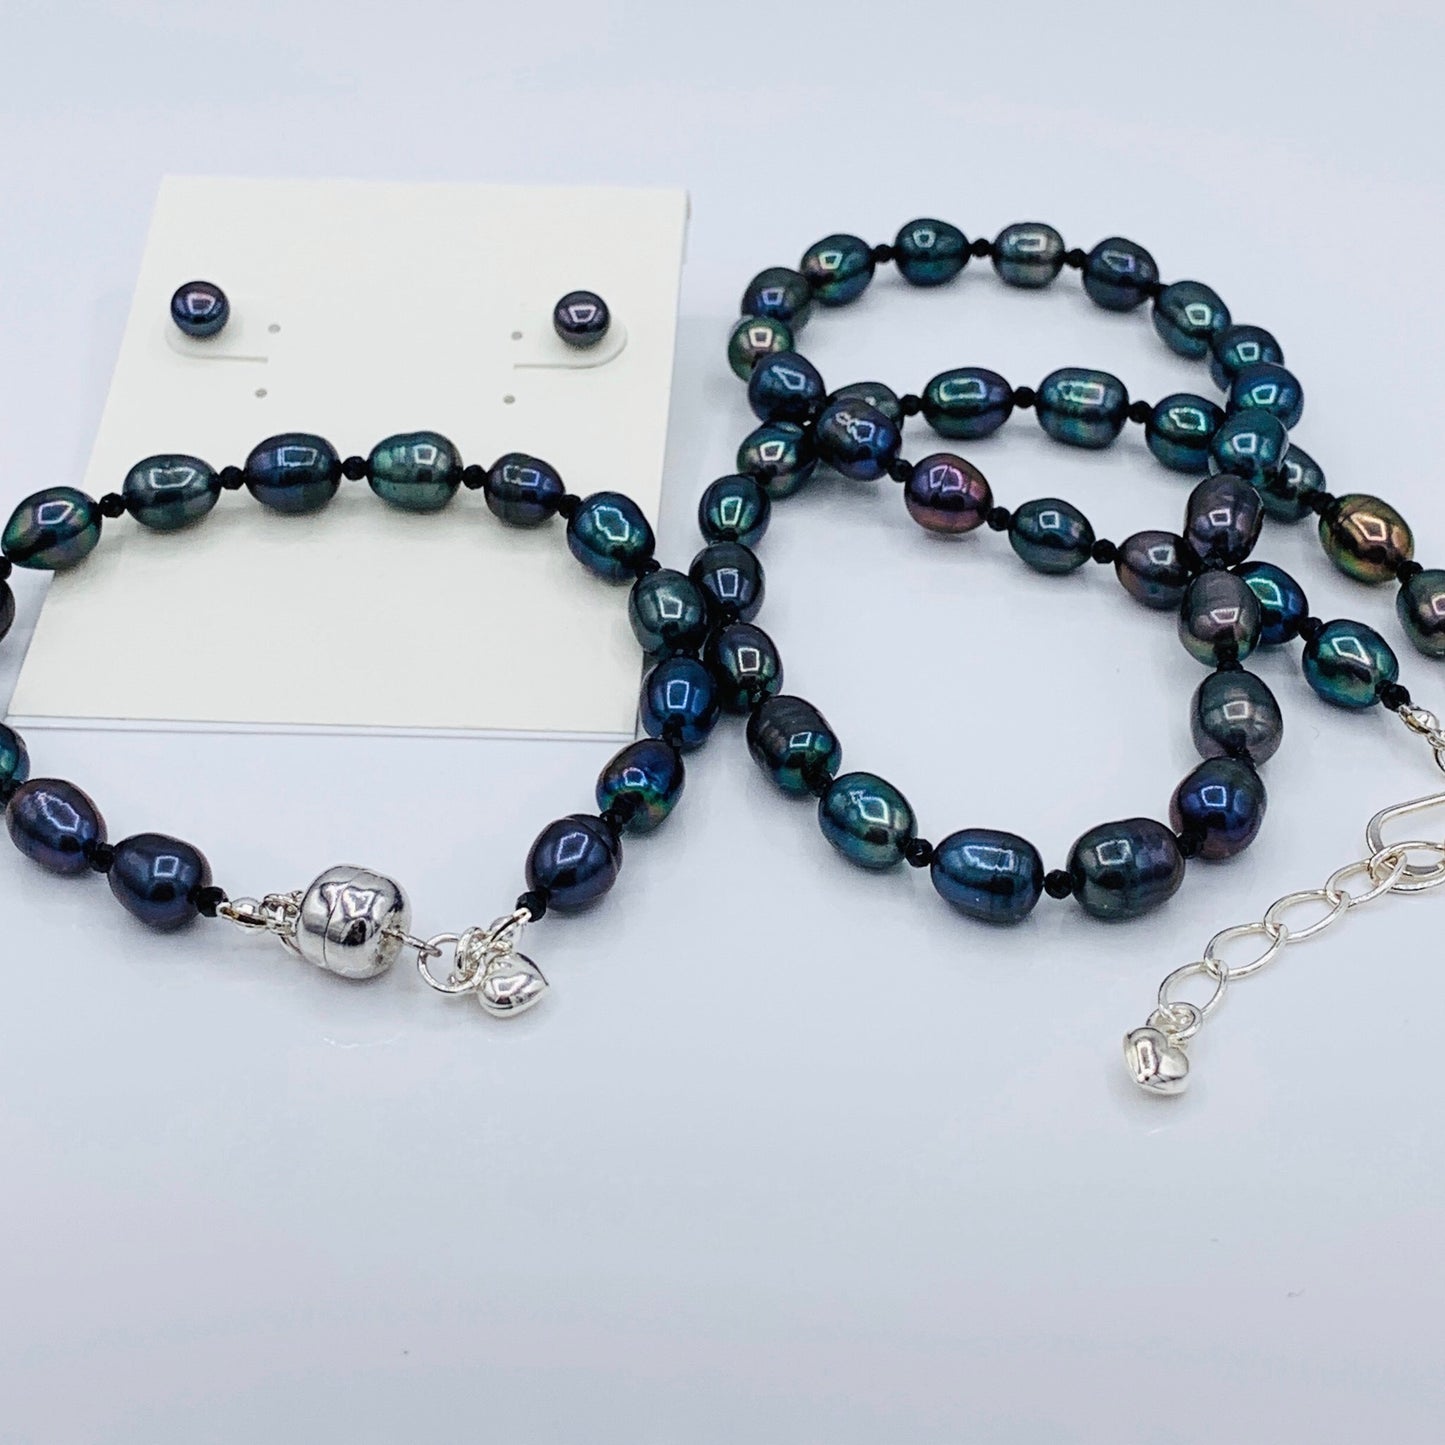 Black Peacock Pearl and Black Spinel Necklace, Bracelet and Earrings Set Sterling Silver